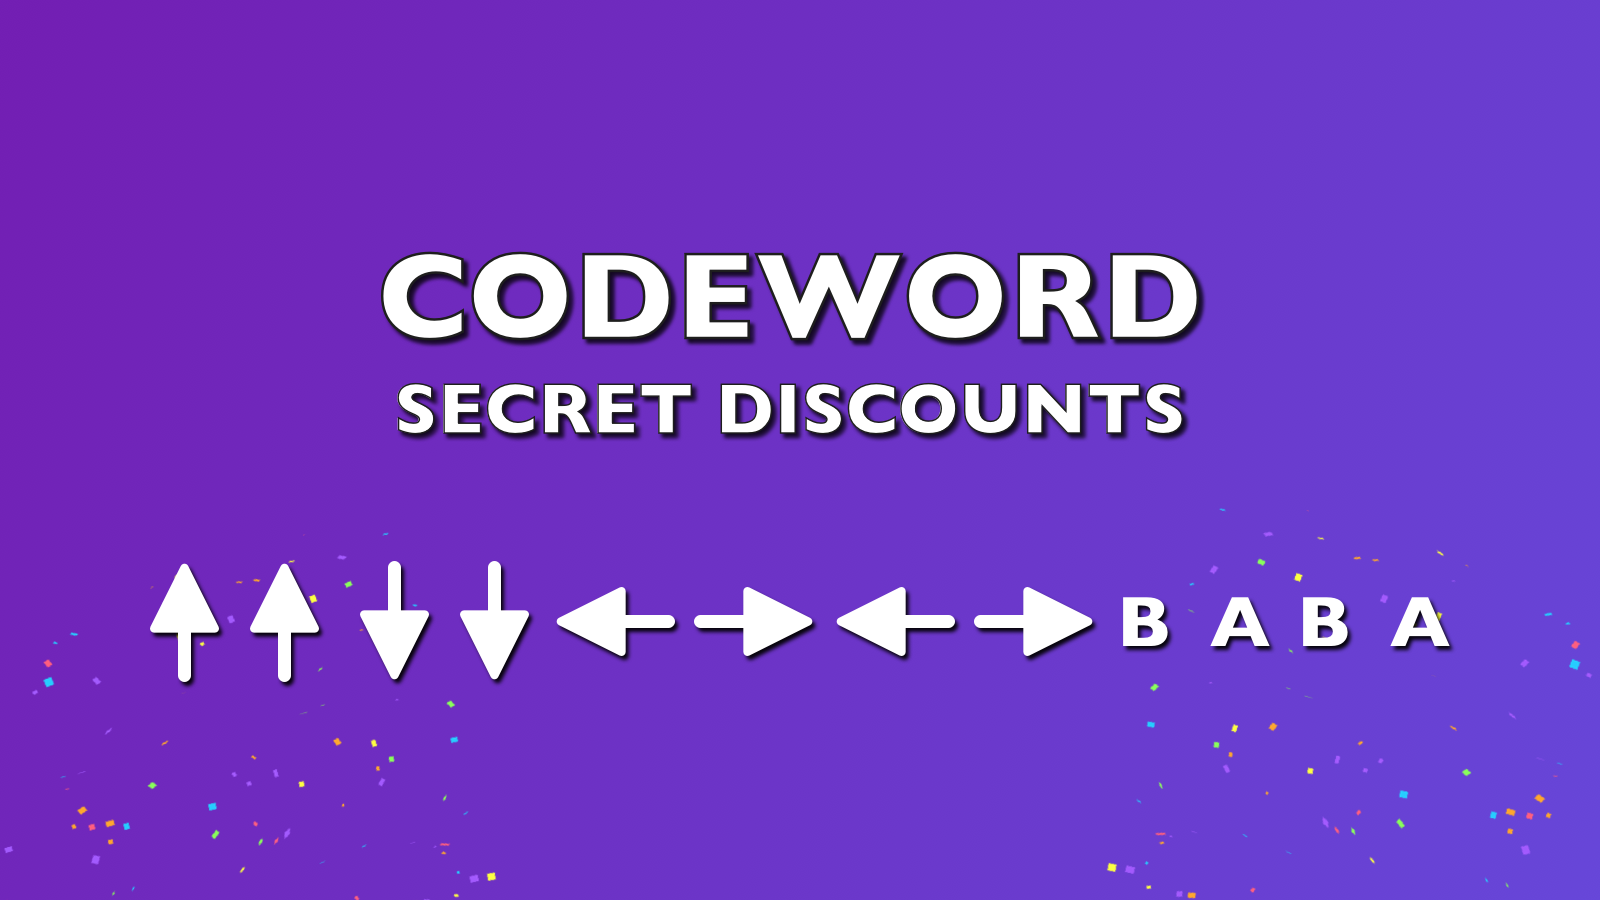 Use any key sequence for your discount